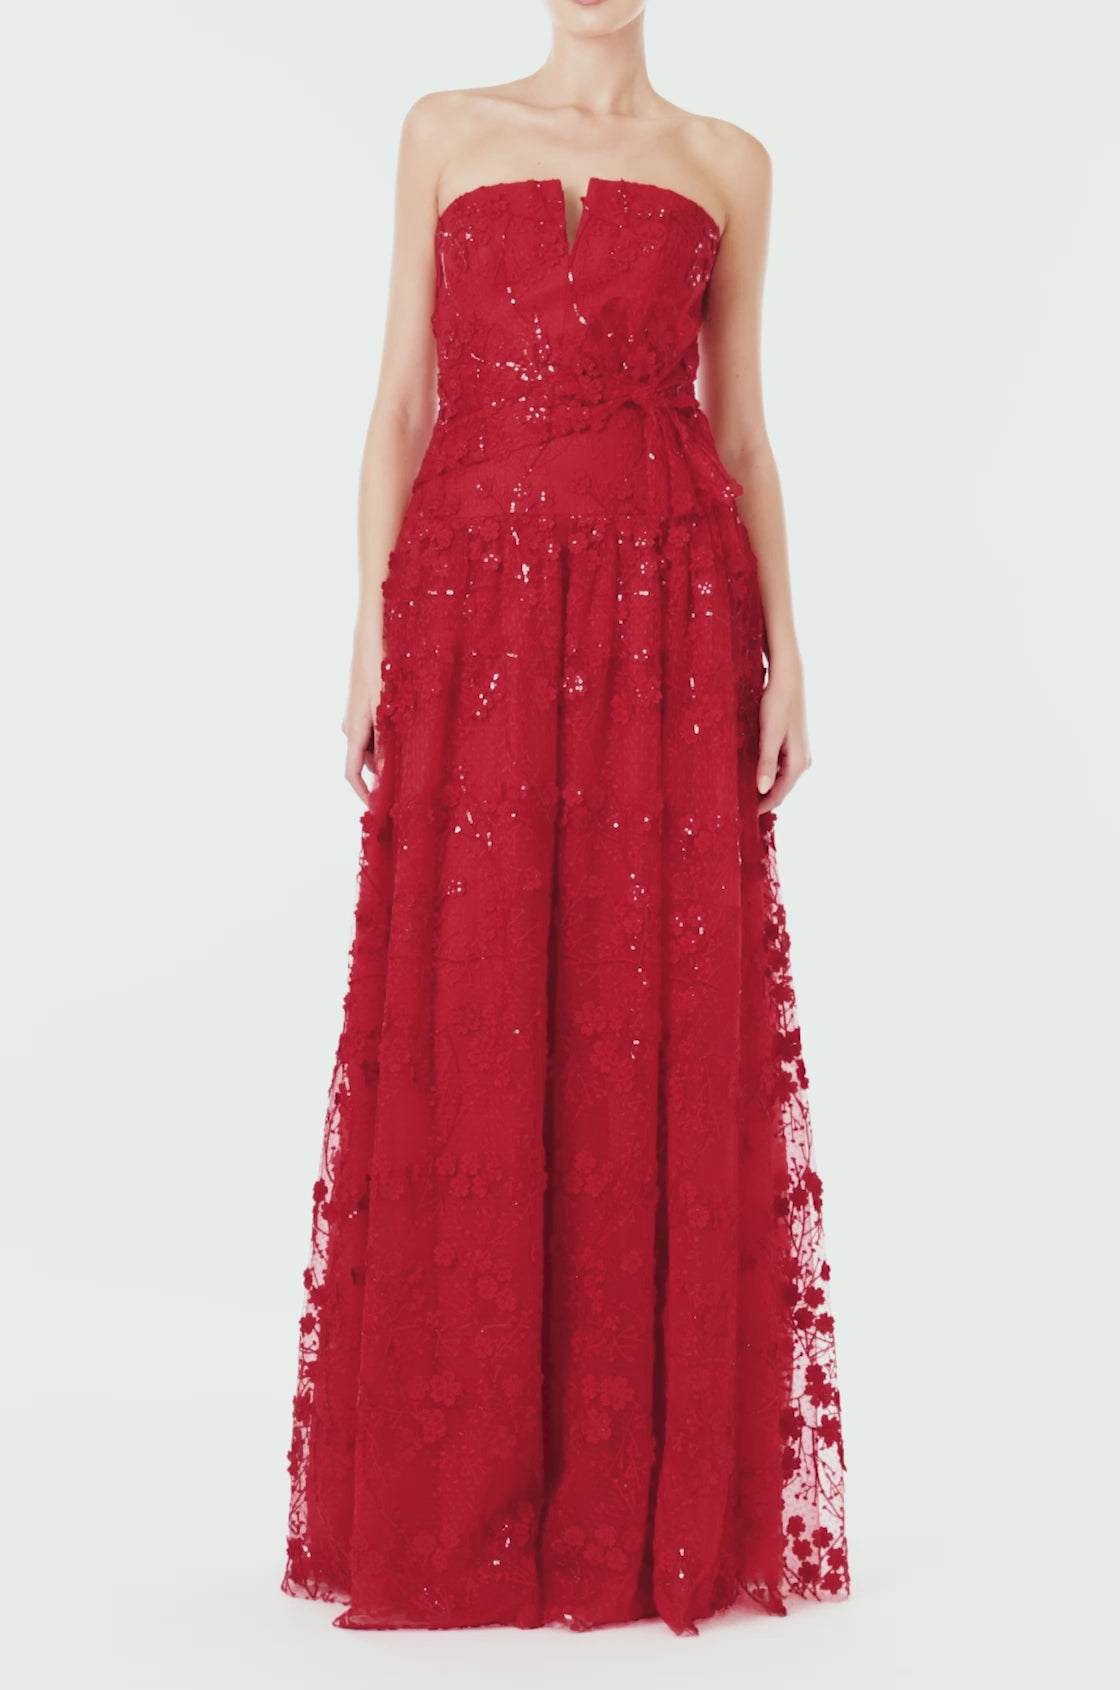 ML Monique Lhuillier red embroidered tulle long dress with strapless bodice and drop waist.